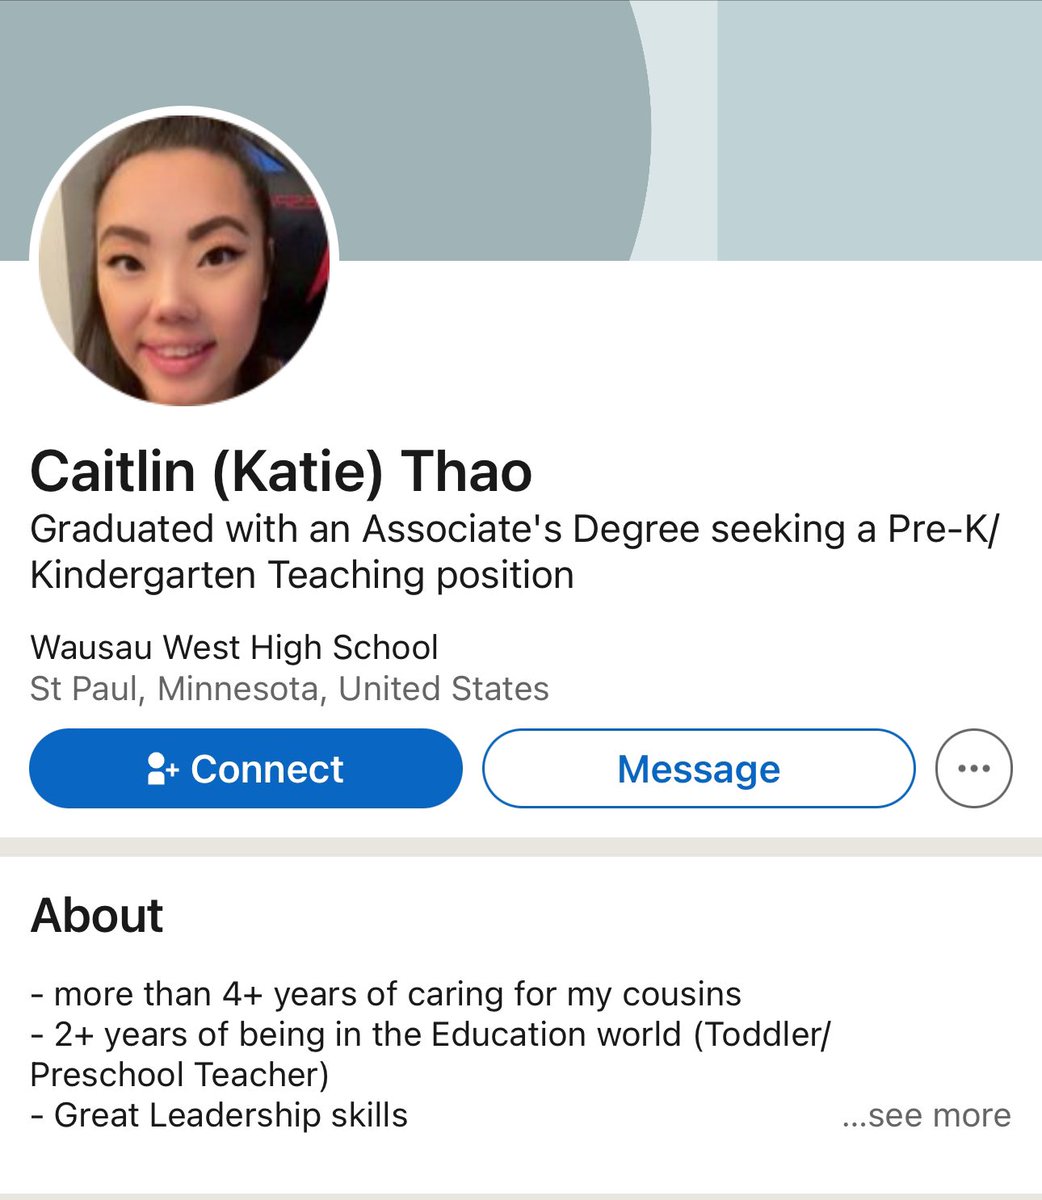 NEW: Female substitute teacher Caitlin Thao is allegedly ‘on the run’ according to the Daily Mail after she was caught r*ping a 17-year-old boy in her classroom. Let’s find this pedo. The incident happened at St Paul City School in Minnesota. A nationwide arrest warrant was